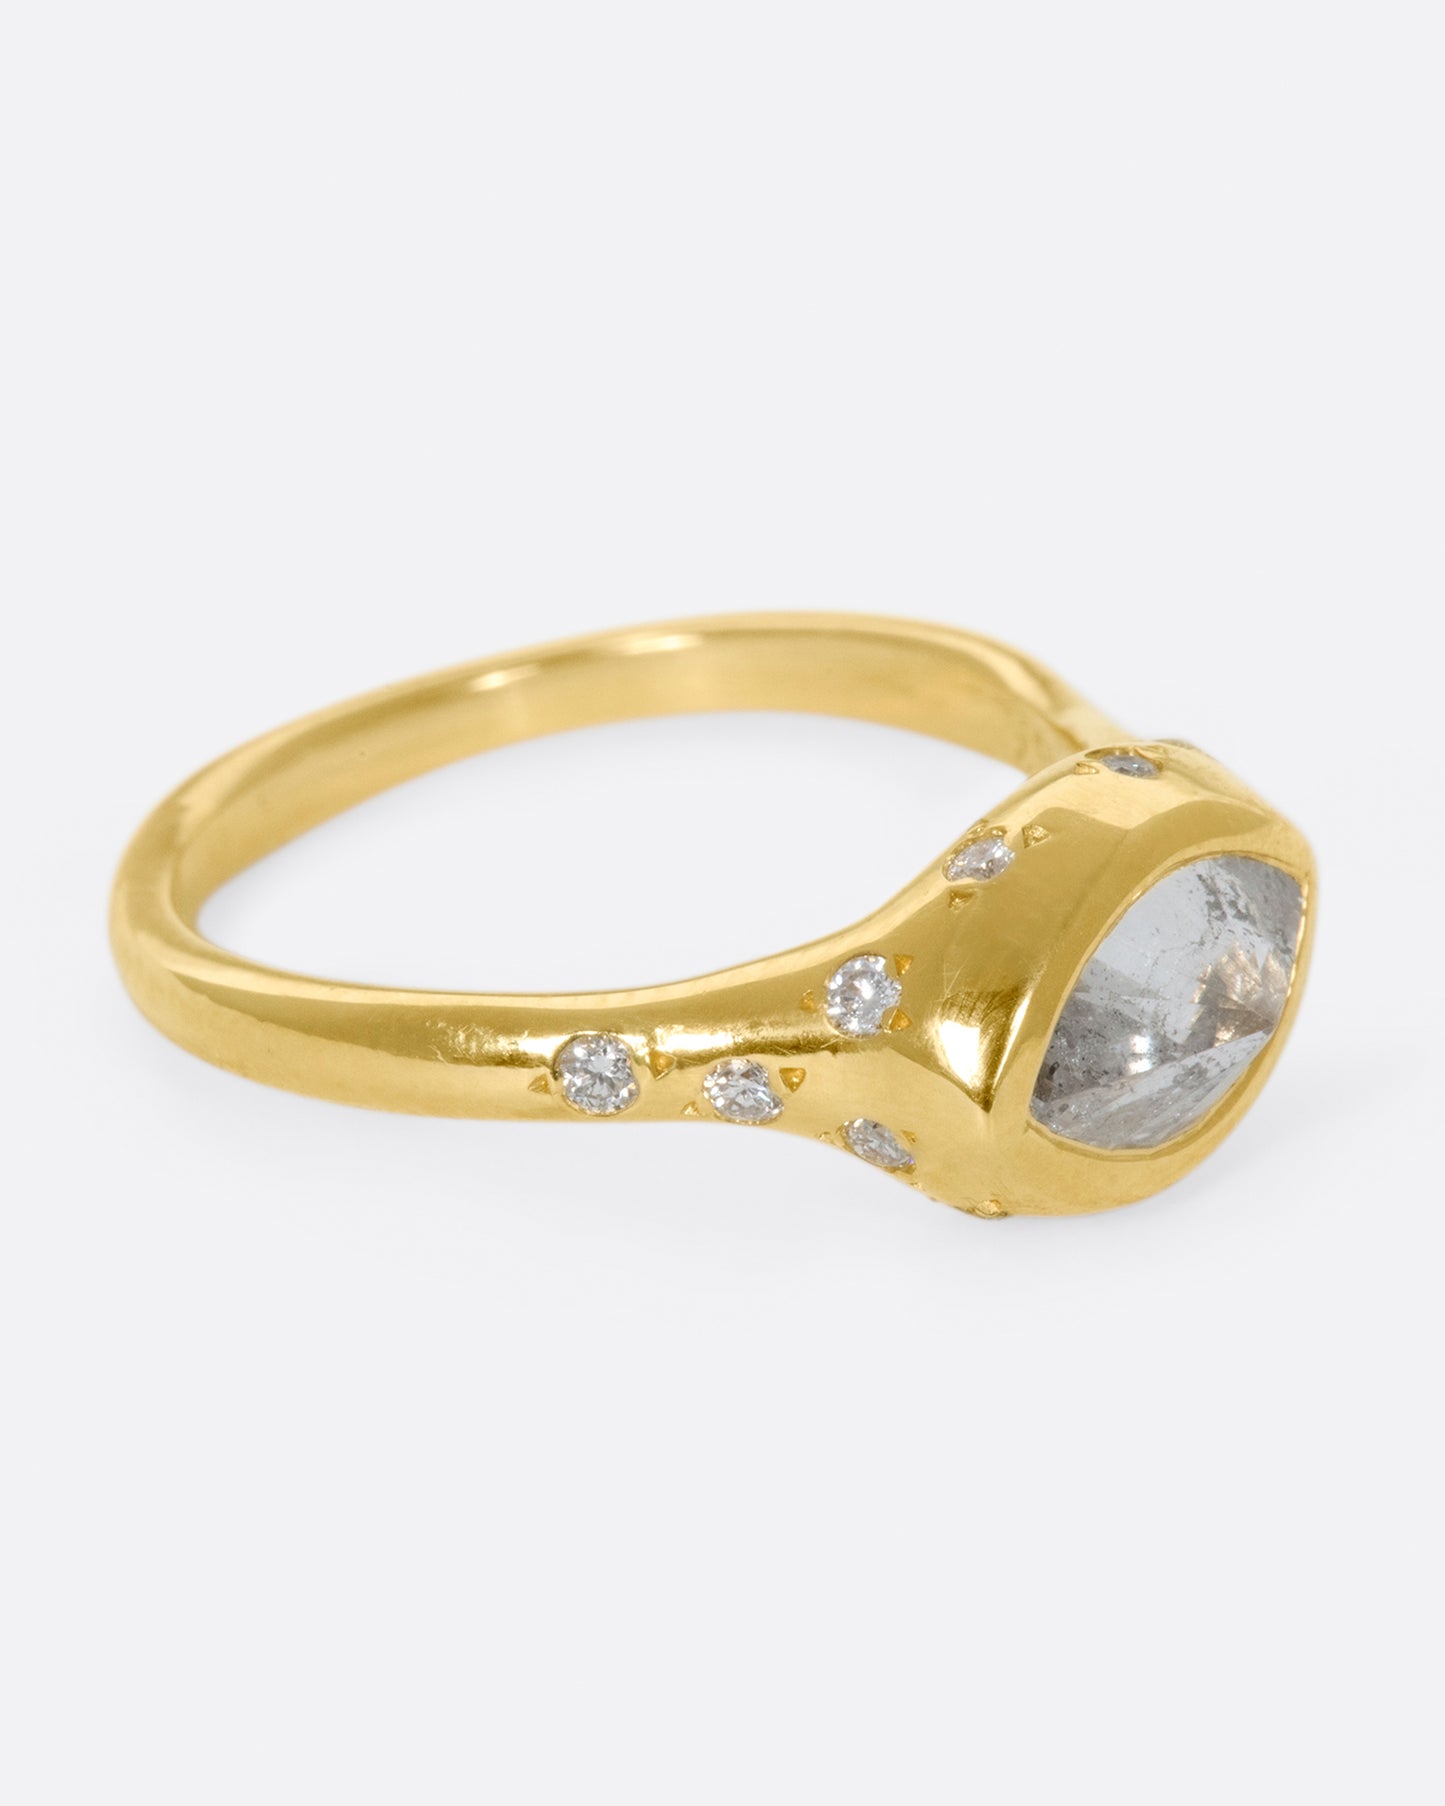 This ring is made extra special by the inverted, east-west diamond at its center.